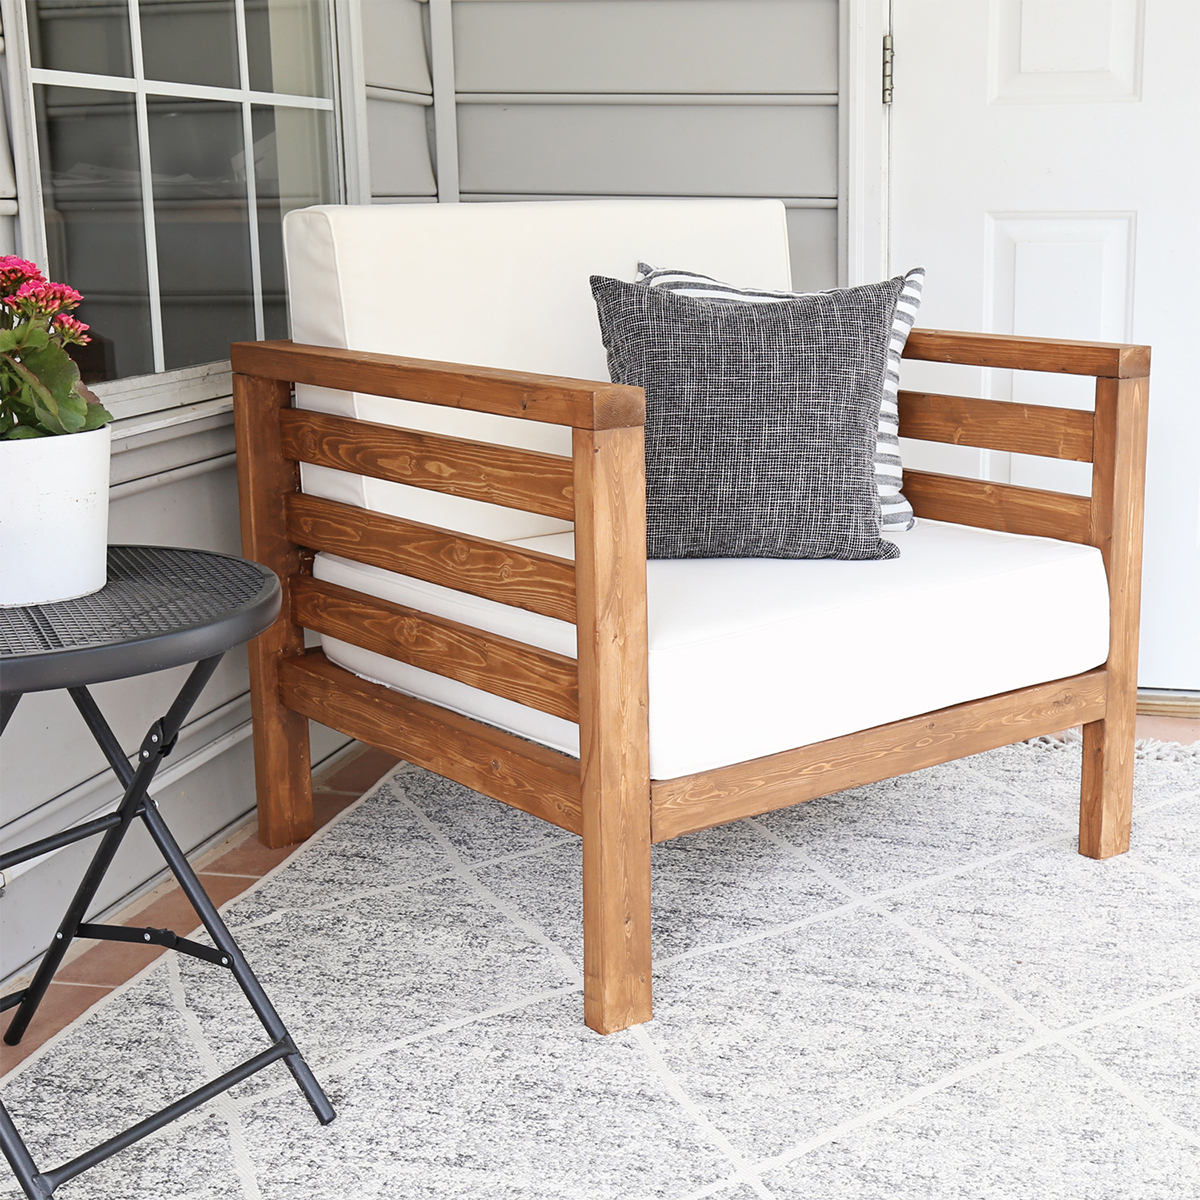 Diy Outdoor Chair Angela Marie Made, Outdoor Wood Chairs With Cushions